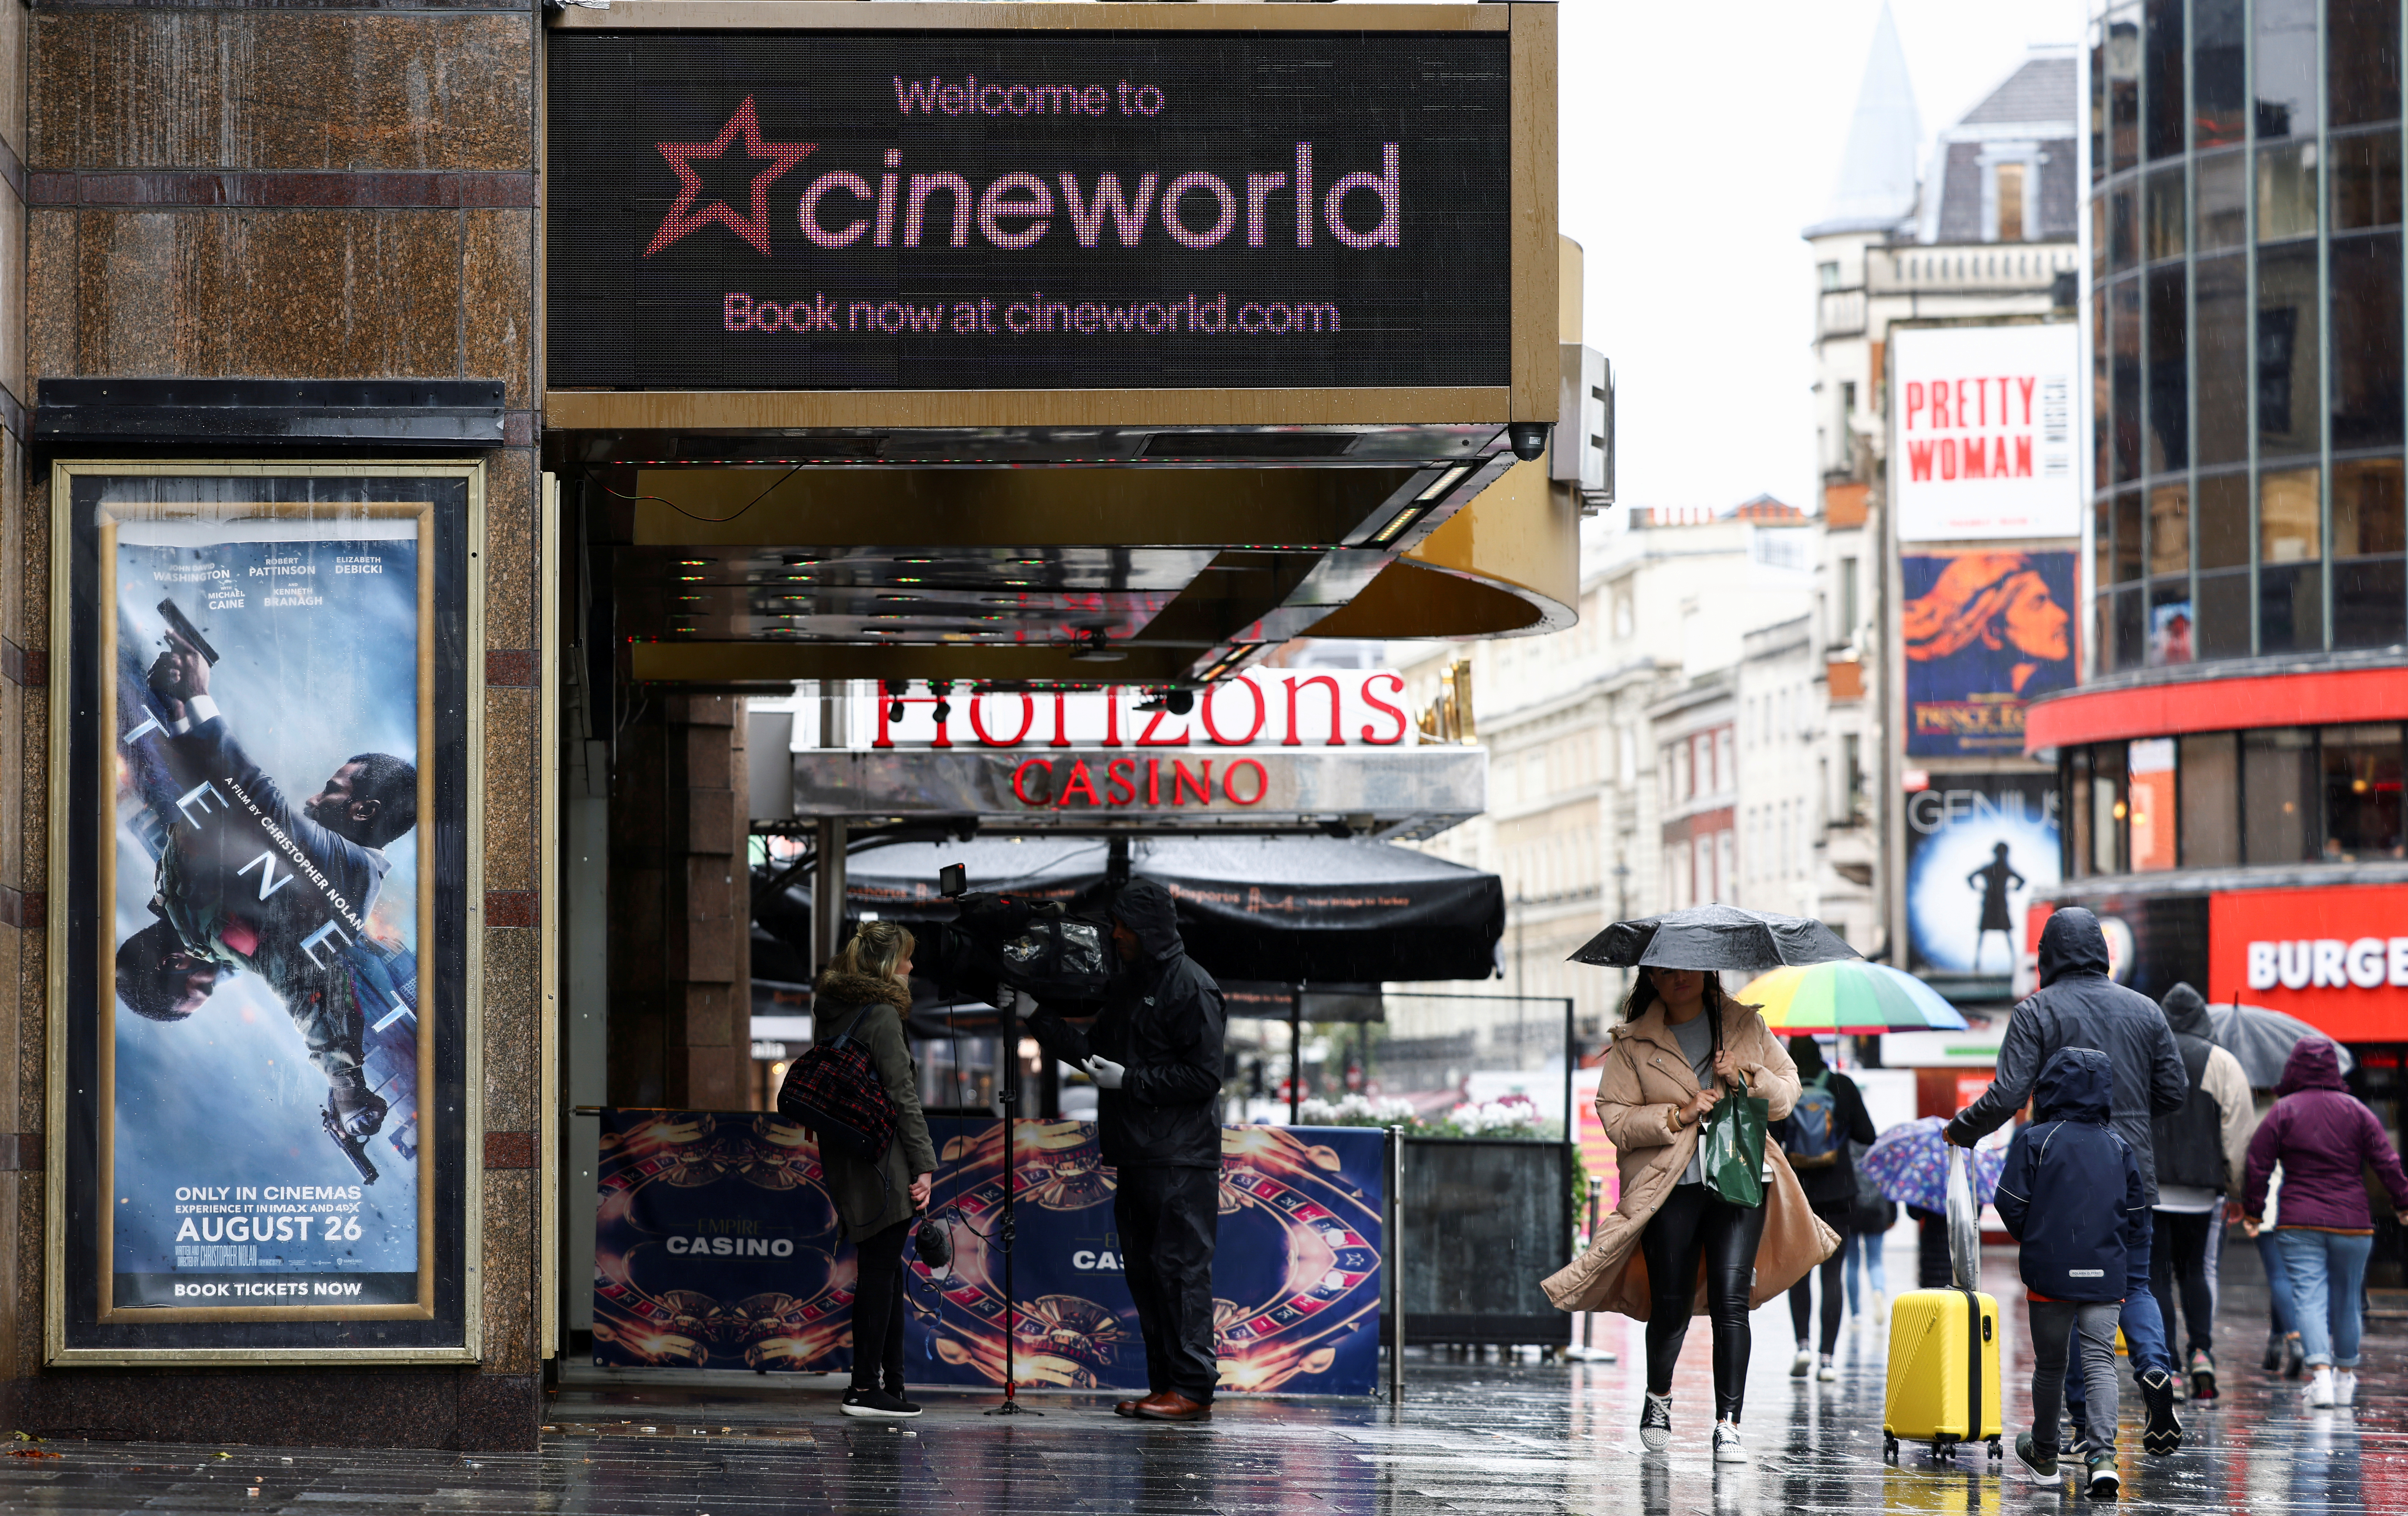 People walk past a Cineworld in Leicester's Square in London